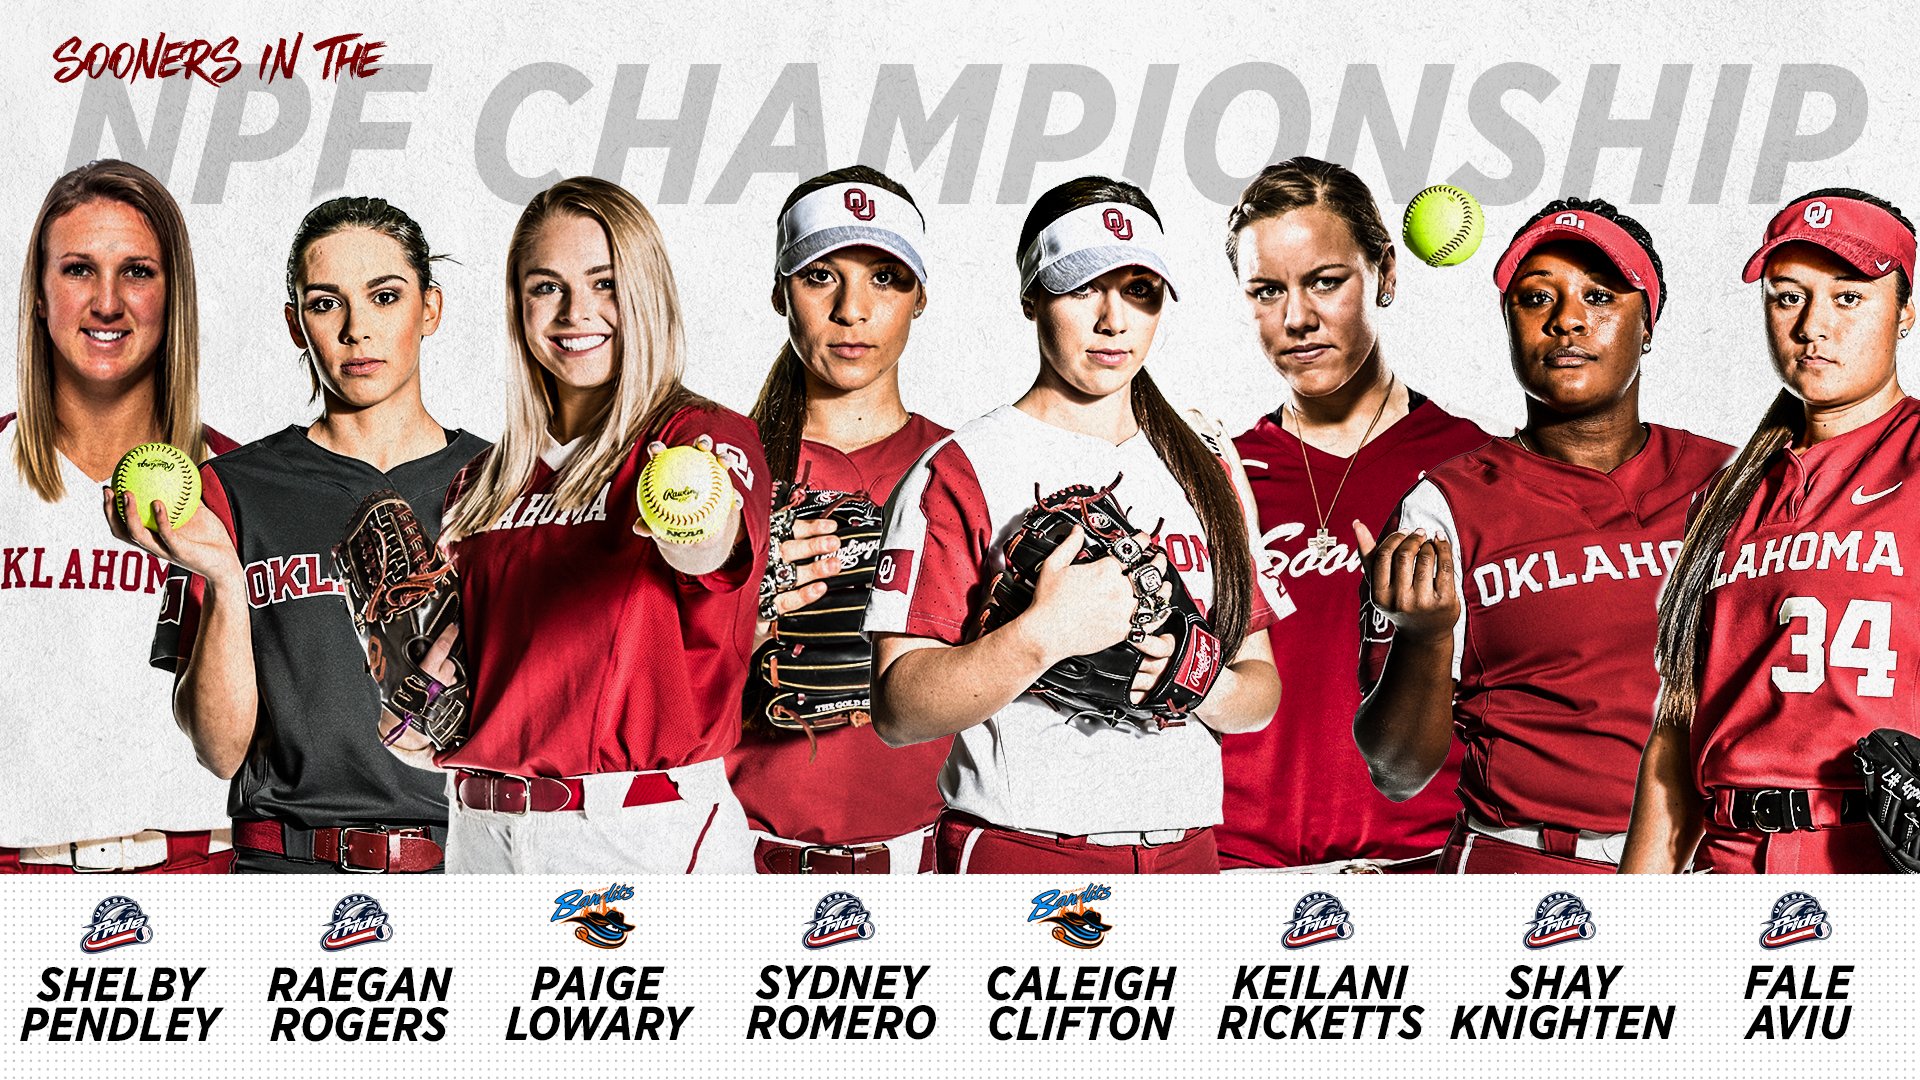 Oklahoma Softball luck to our #Sooners in the NPF championship series beginning tonight! With eight players, OU has the most alumni in the series of any school. Former Sooner